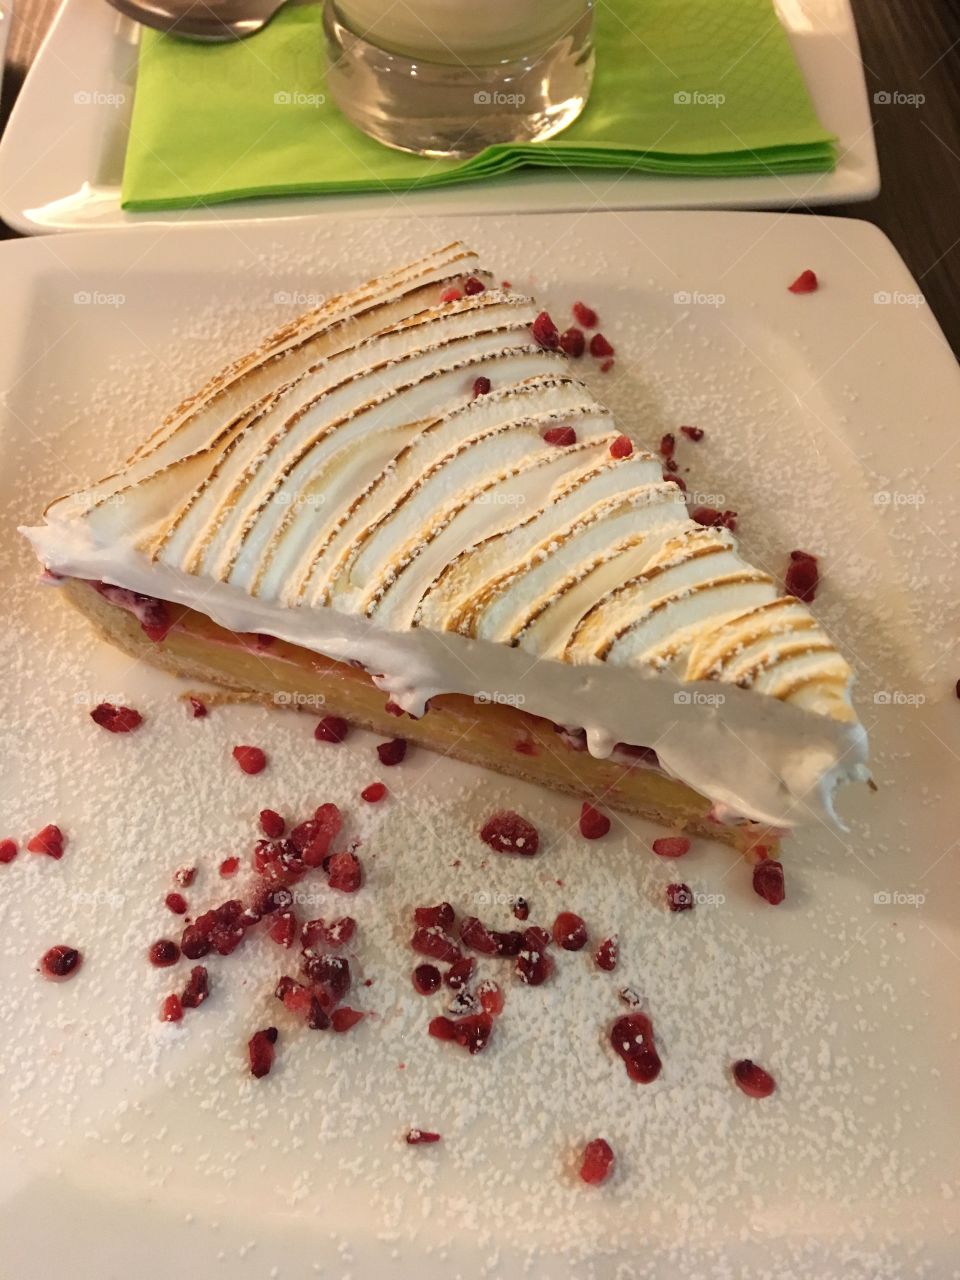 Raspberry lemon pie with merengue topping